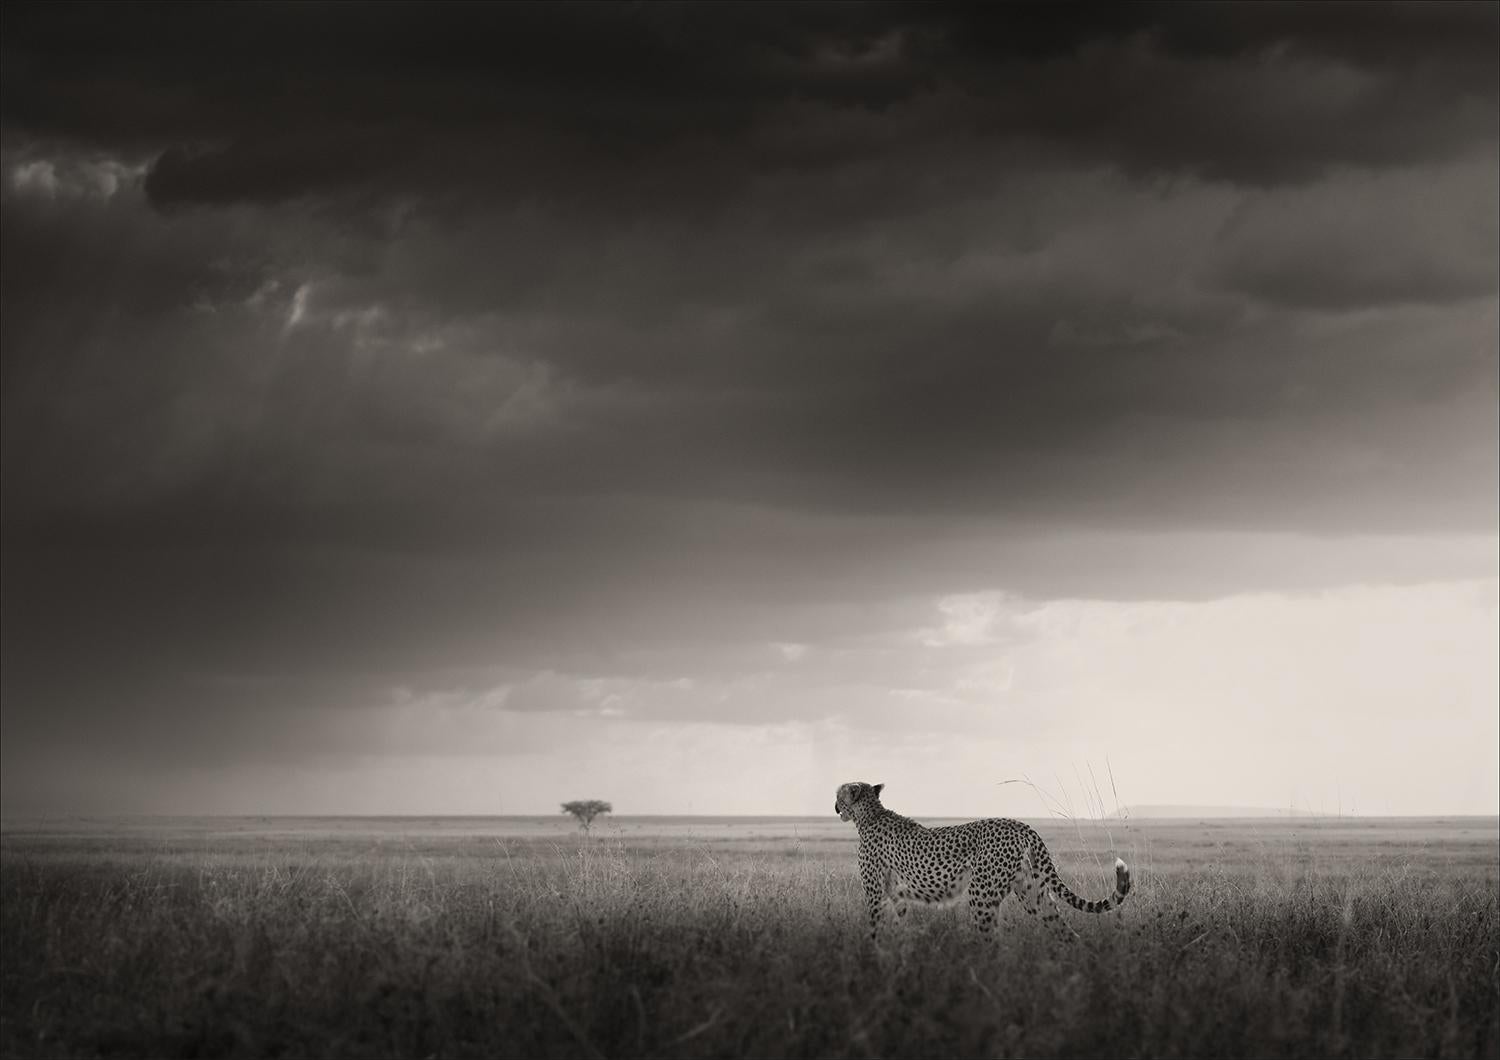 Joachim Schmeisser Landscape Photograph - Long road out of Eden, black and white, animal, Africa, Photography, Cheetah